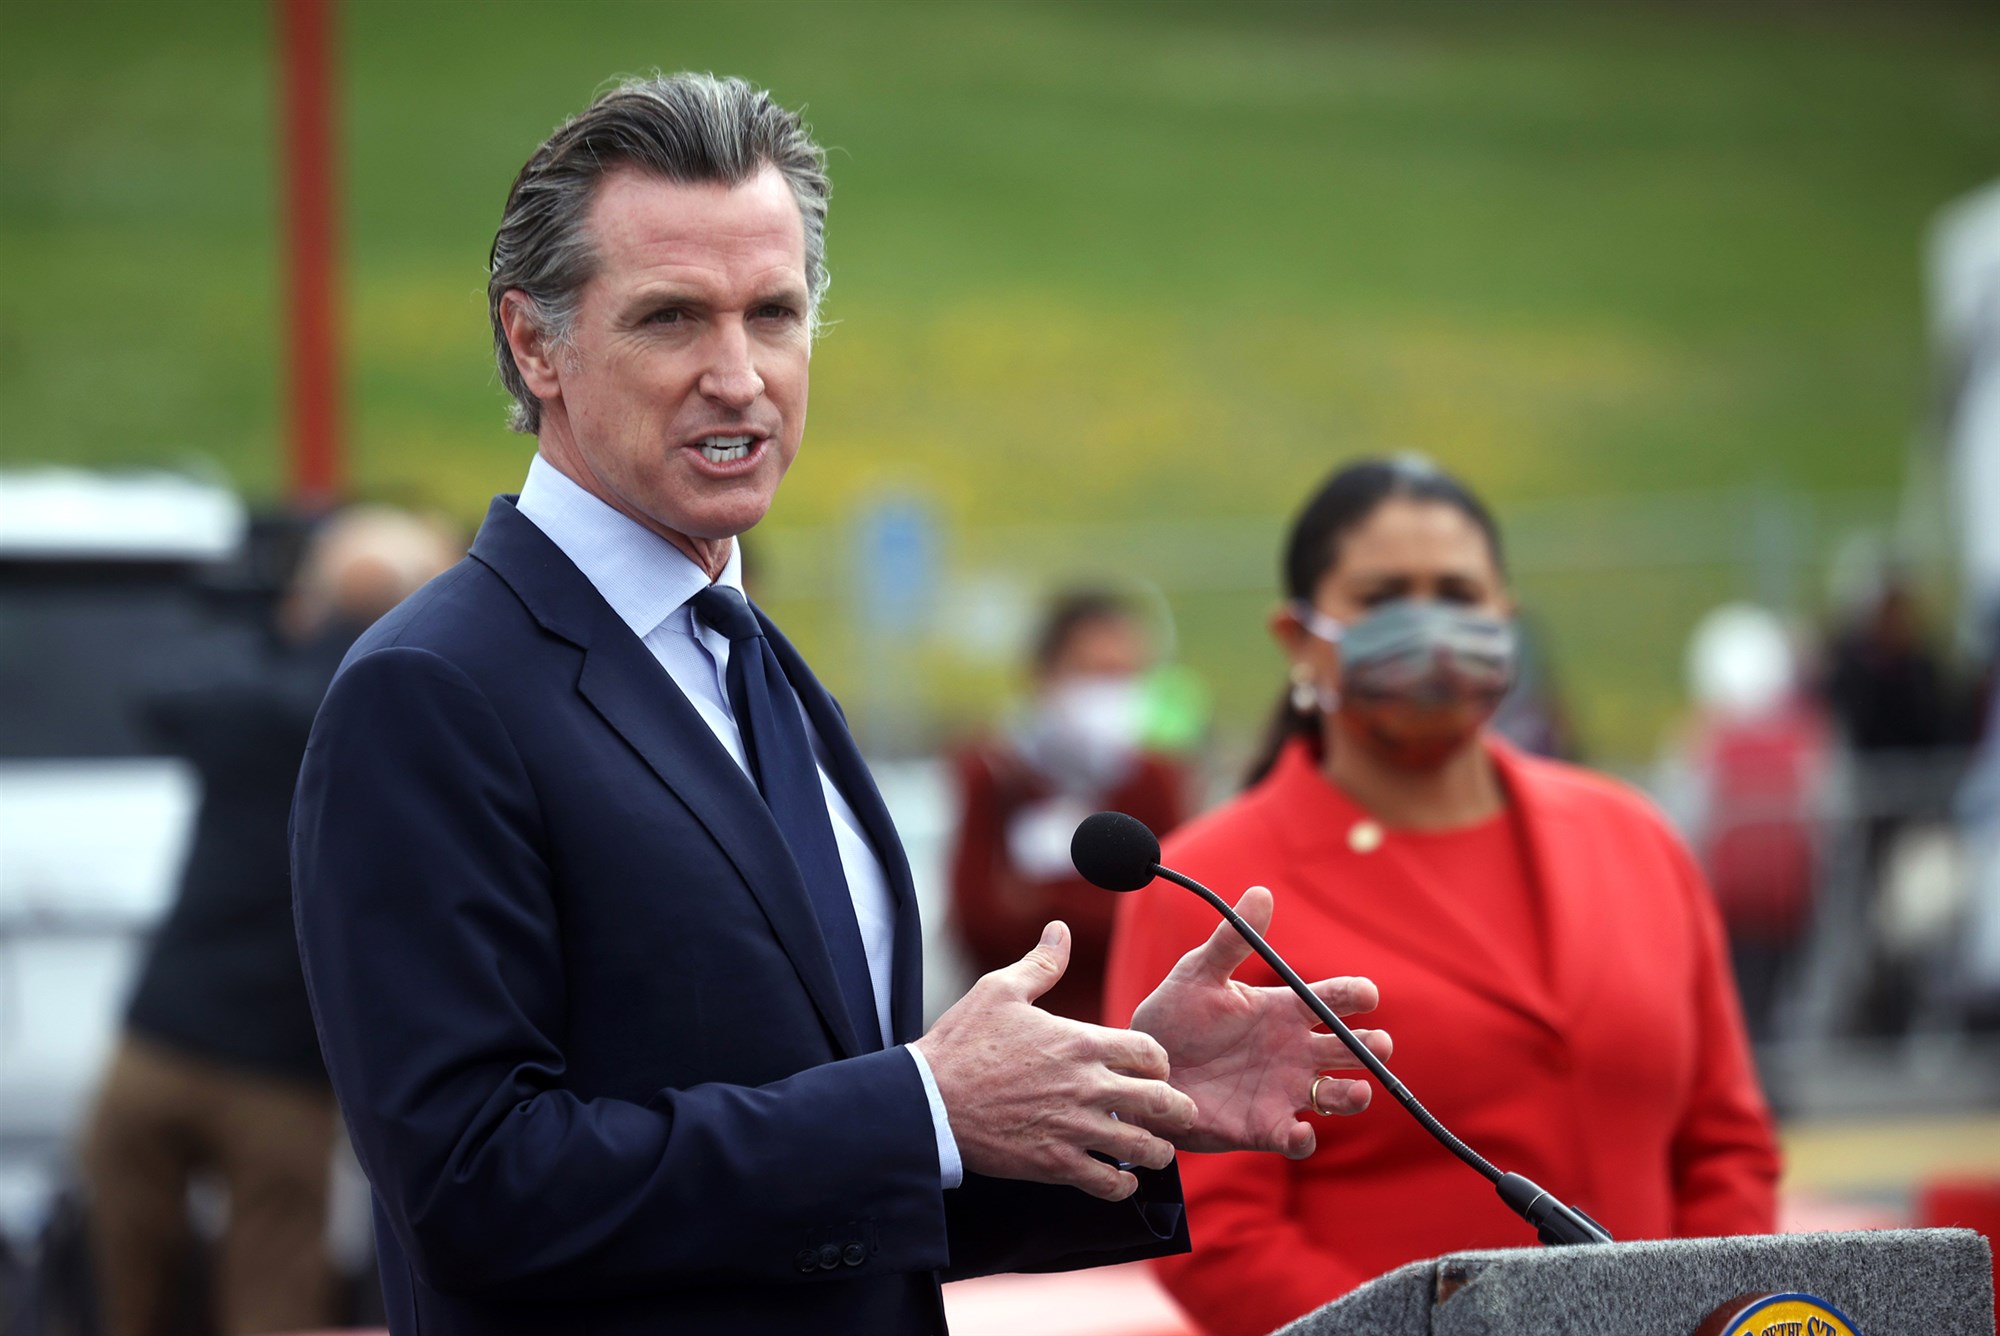 California Gov. Gavin Newsom speaks during a news conference after touring the vaccination clinic at City College of San Francisco with San Francisco Mayor London Breed, right, on April 6.Justin Sullivan / Getty Images